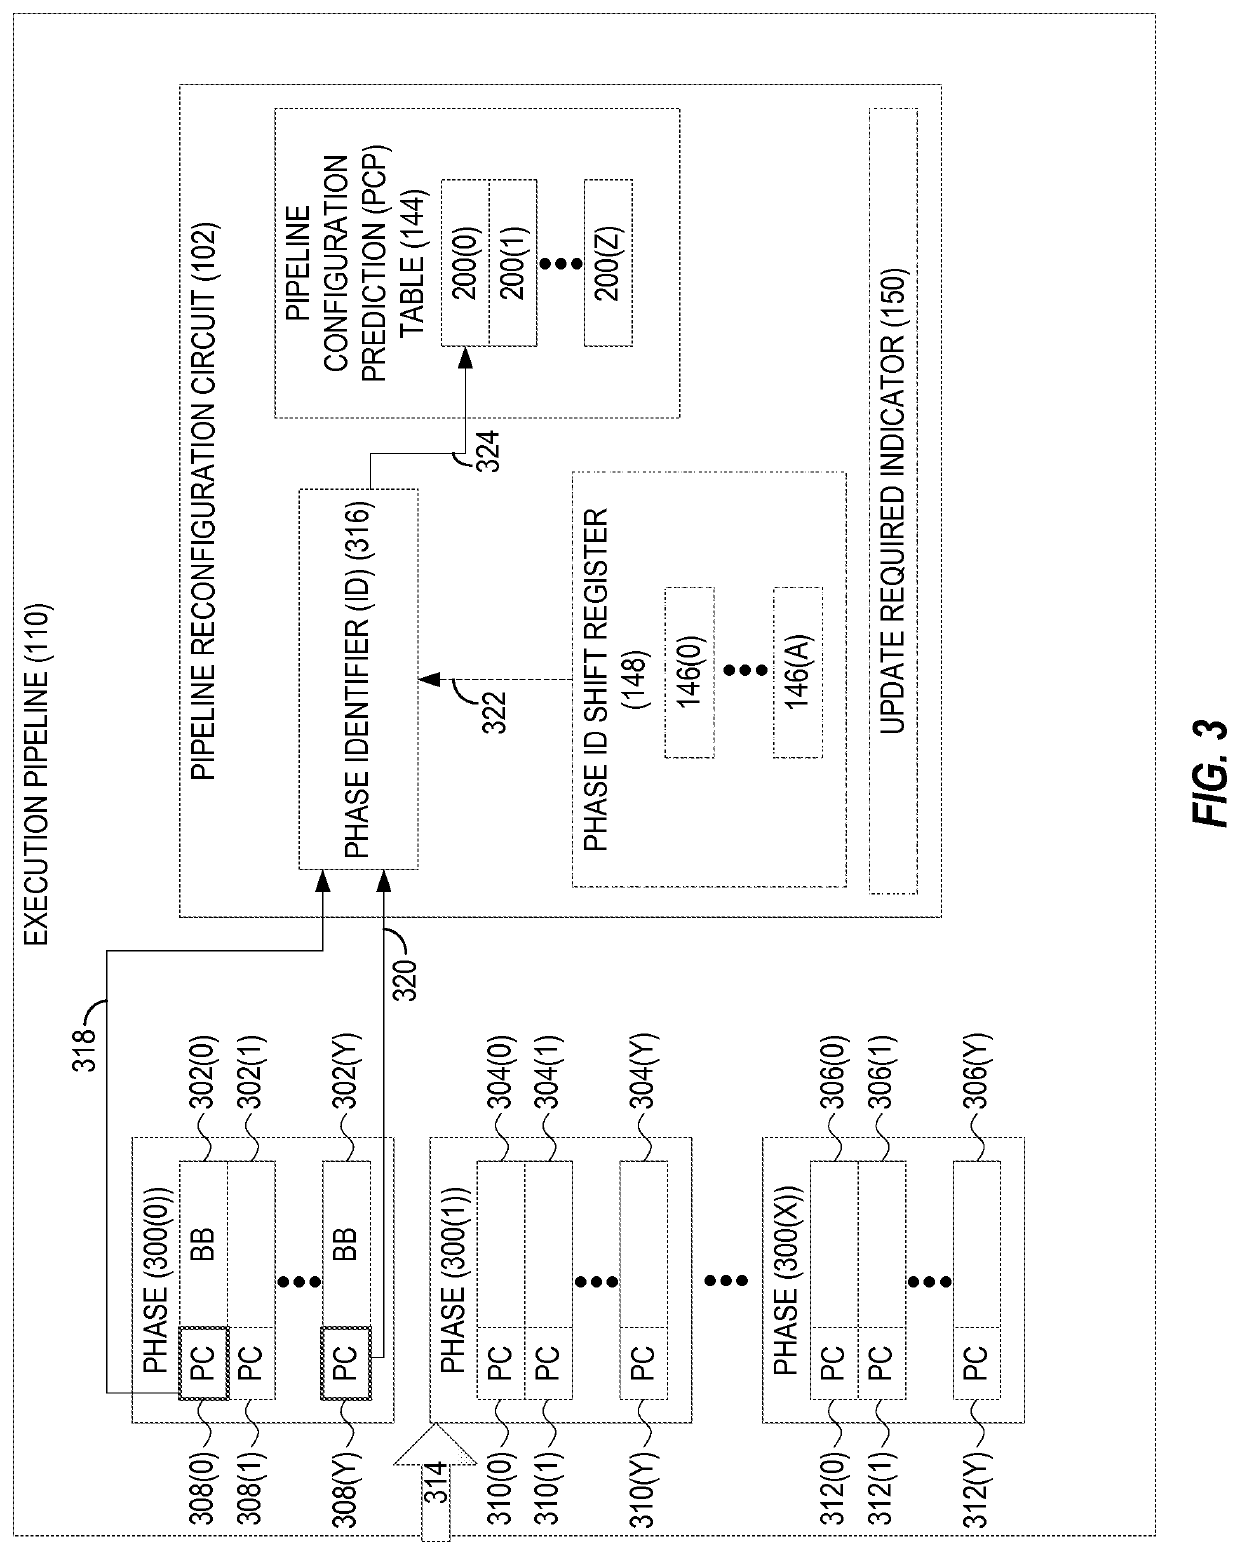 Reconfiguring execution pipelines of out-of-order (OOO) computer processors based on phase training and prediction